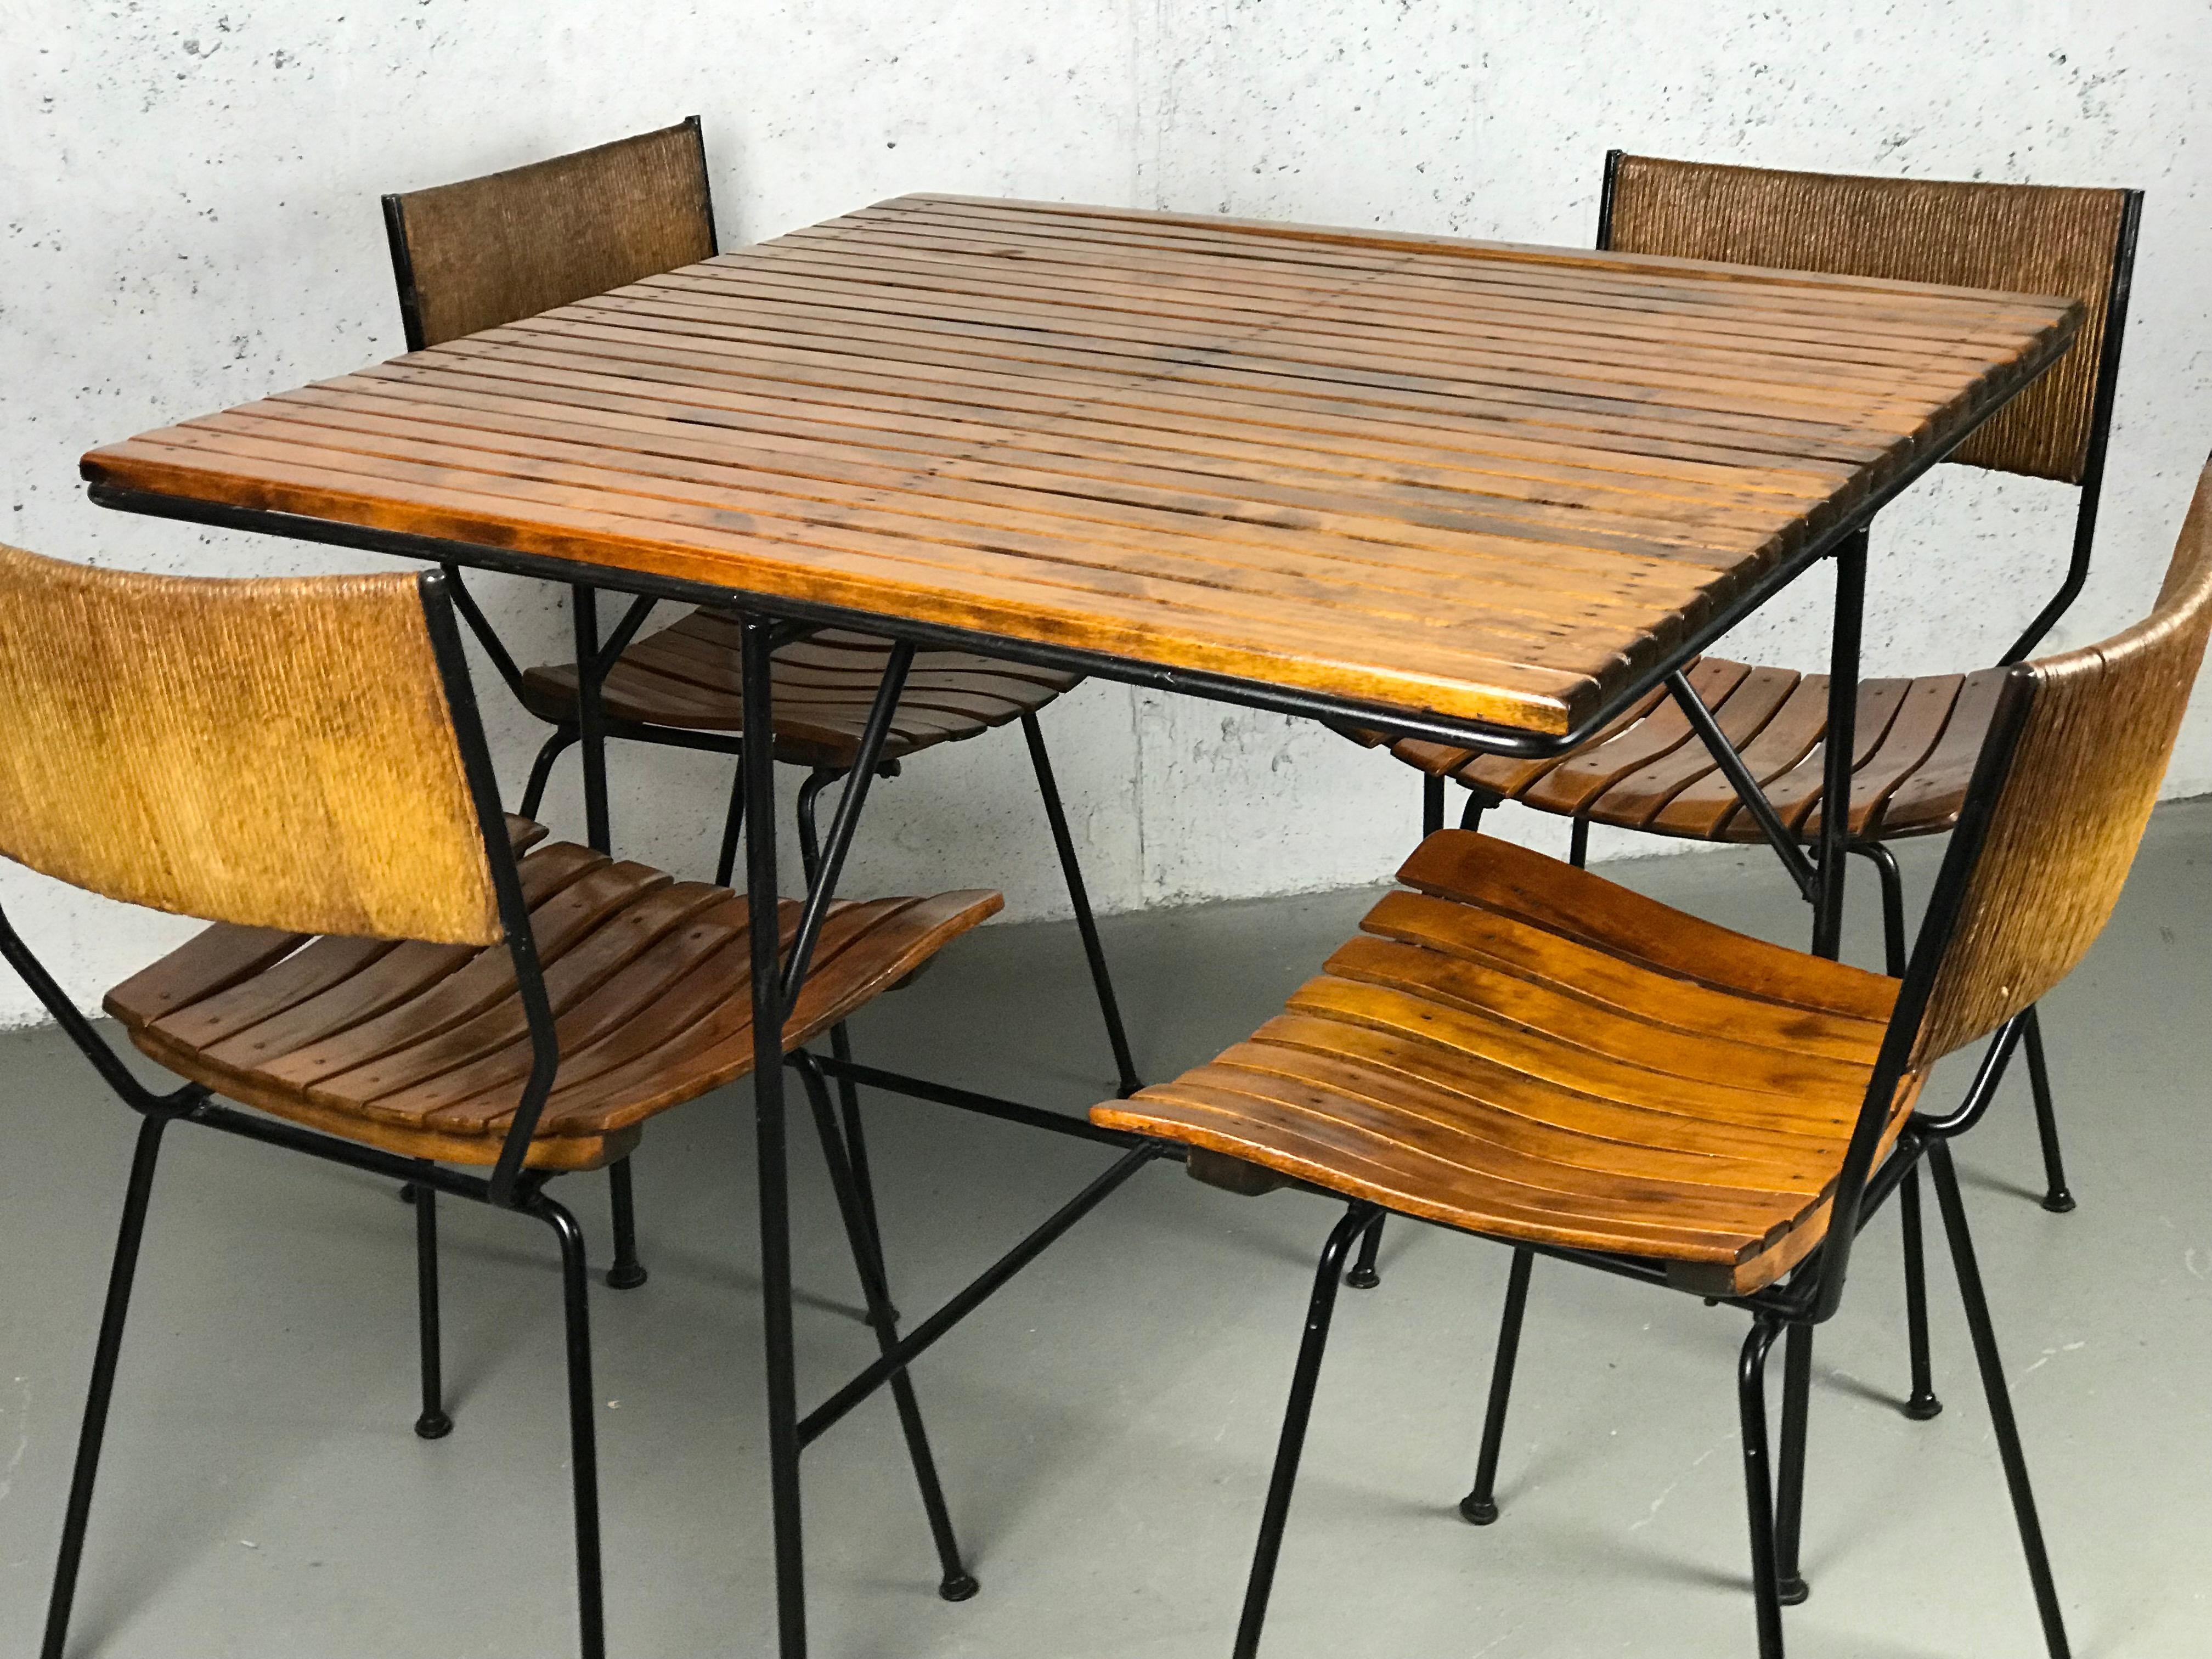 Beautiful Minimalist 1950s dining set designed by Arthur Umanoff in iron, rope and wood. 
Shaver Howard manufactured the set for Raymor. The original feet glides are present.
(2) chairs 
Each chair measures: 31